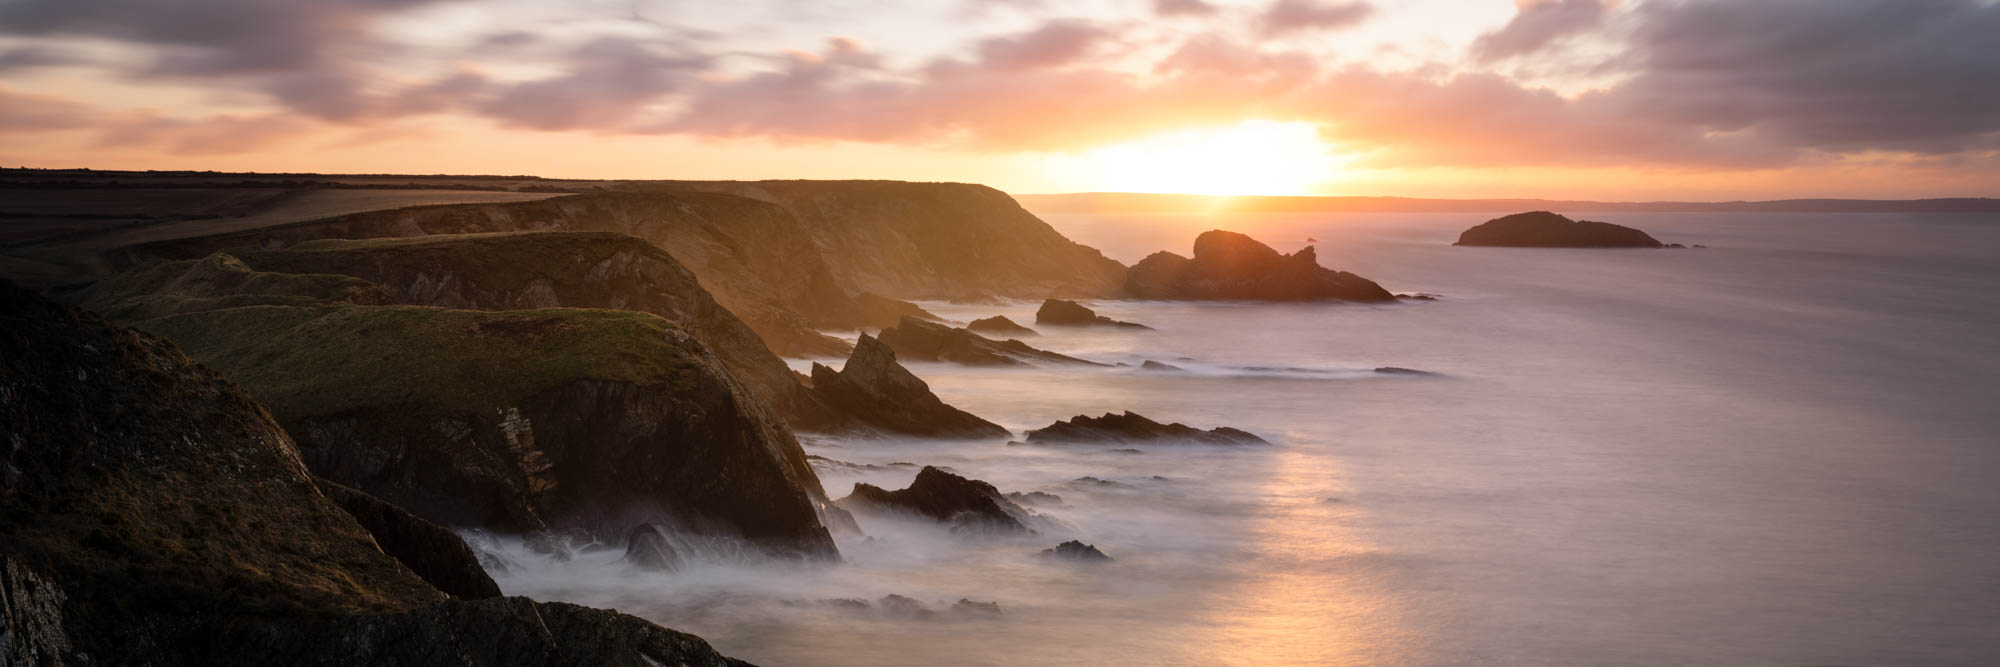 Panorama of St Brides Bay at sunrise on the Pembrokeshire Coast